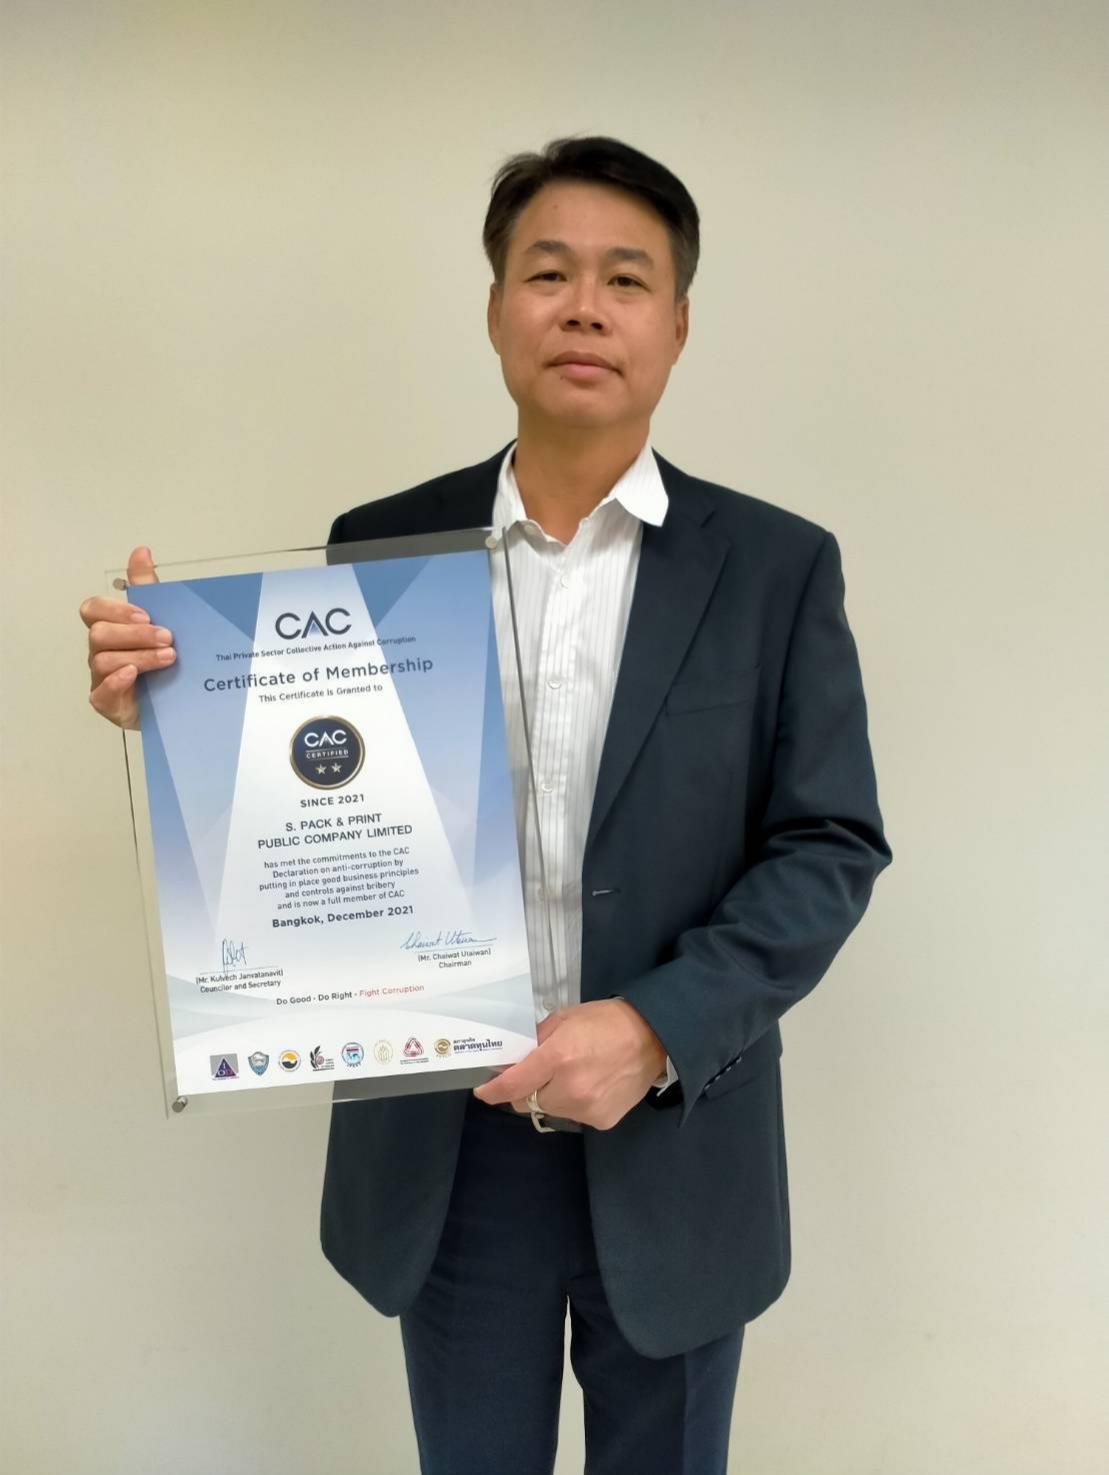 S.Pack & Print PCL received 'anti-corruption organization certified' by CAC.